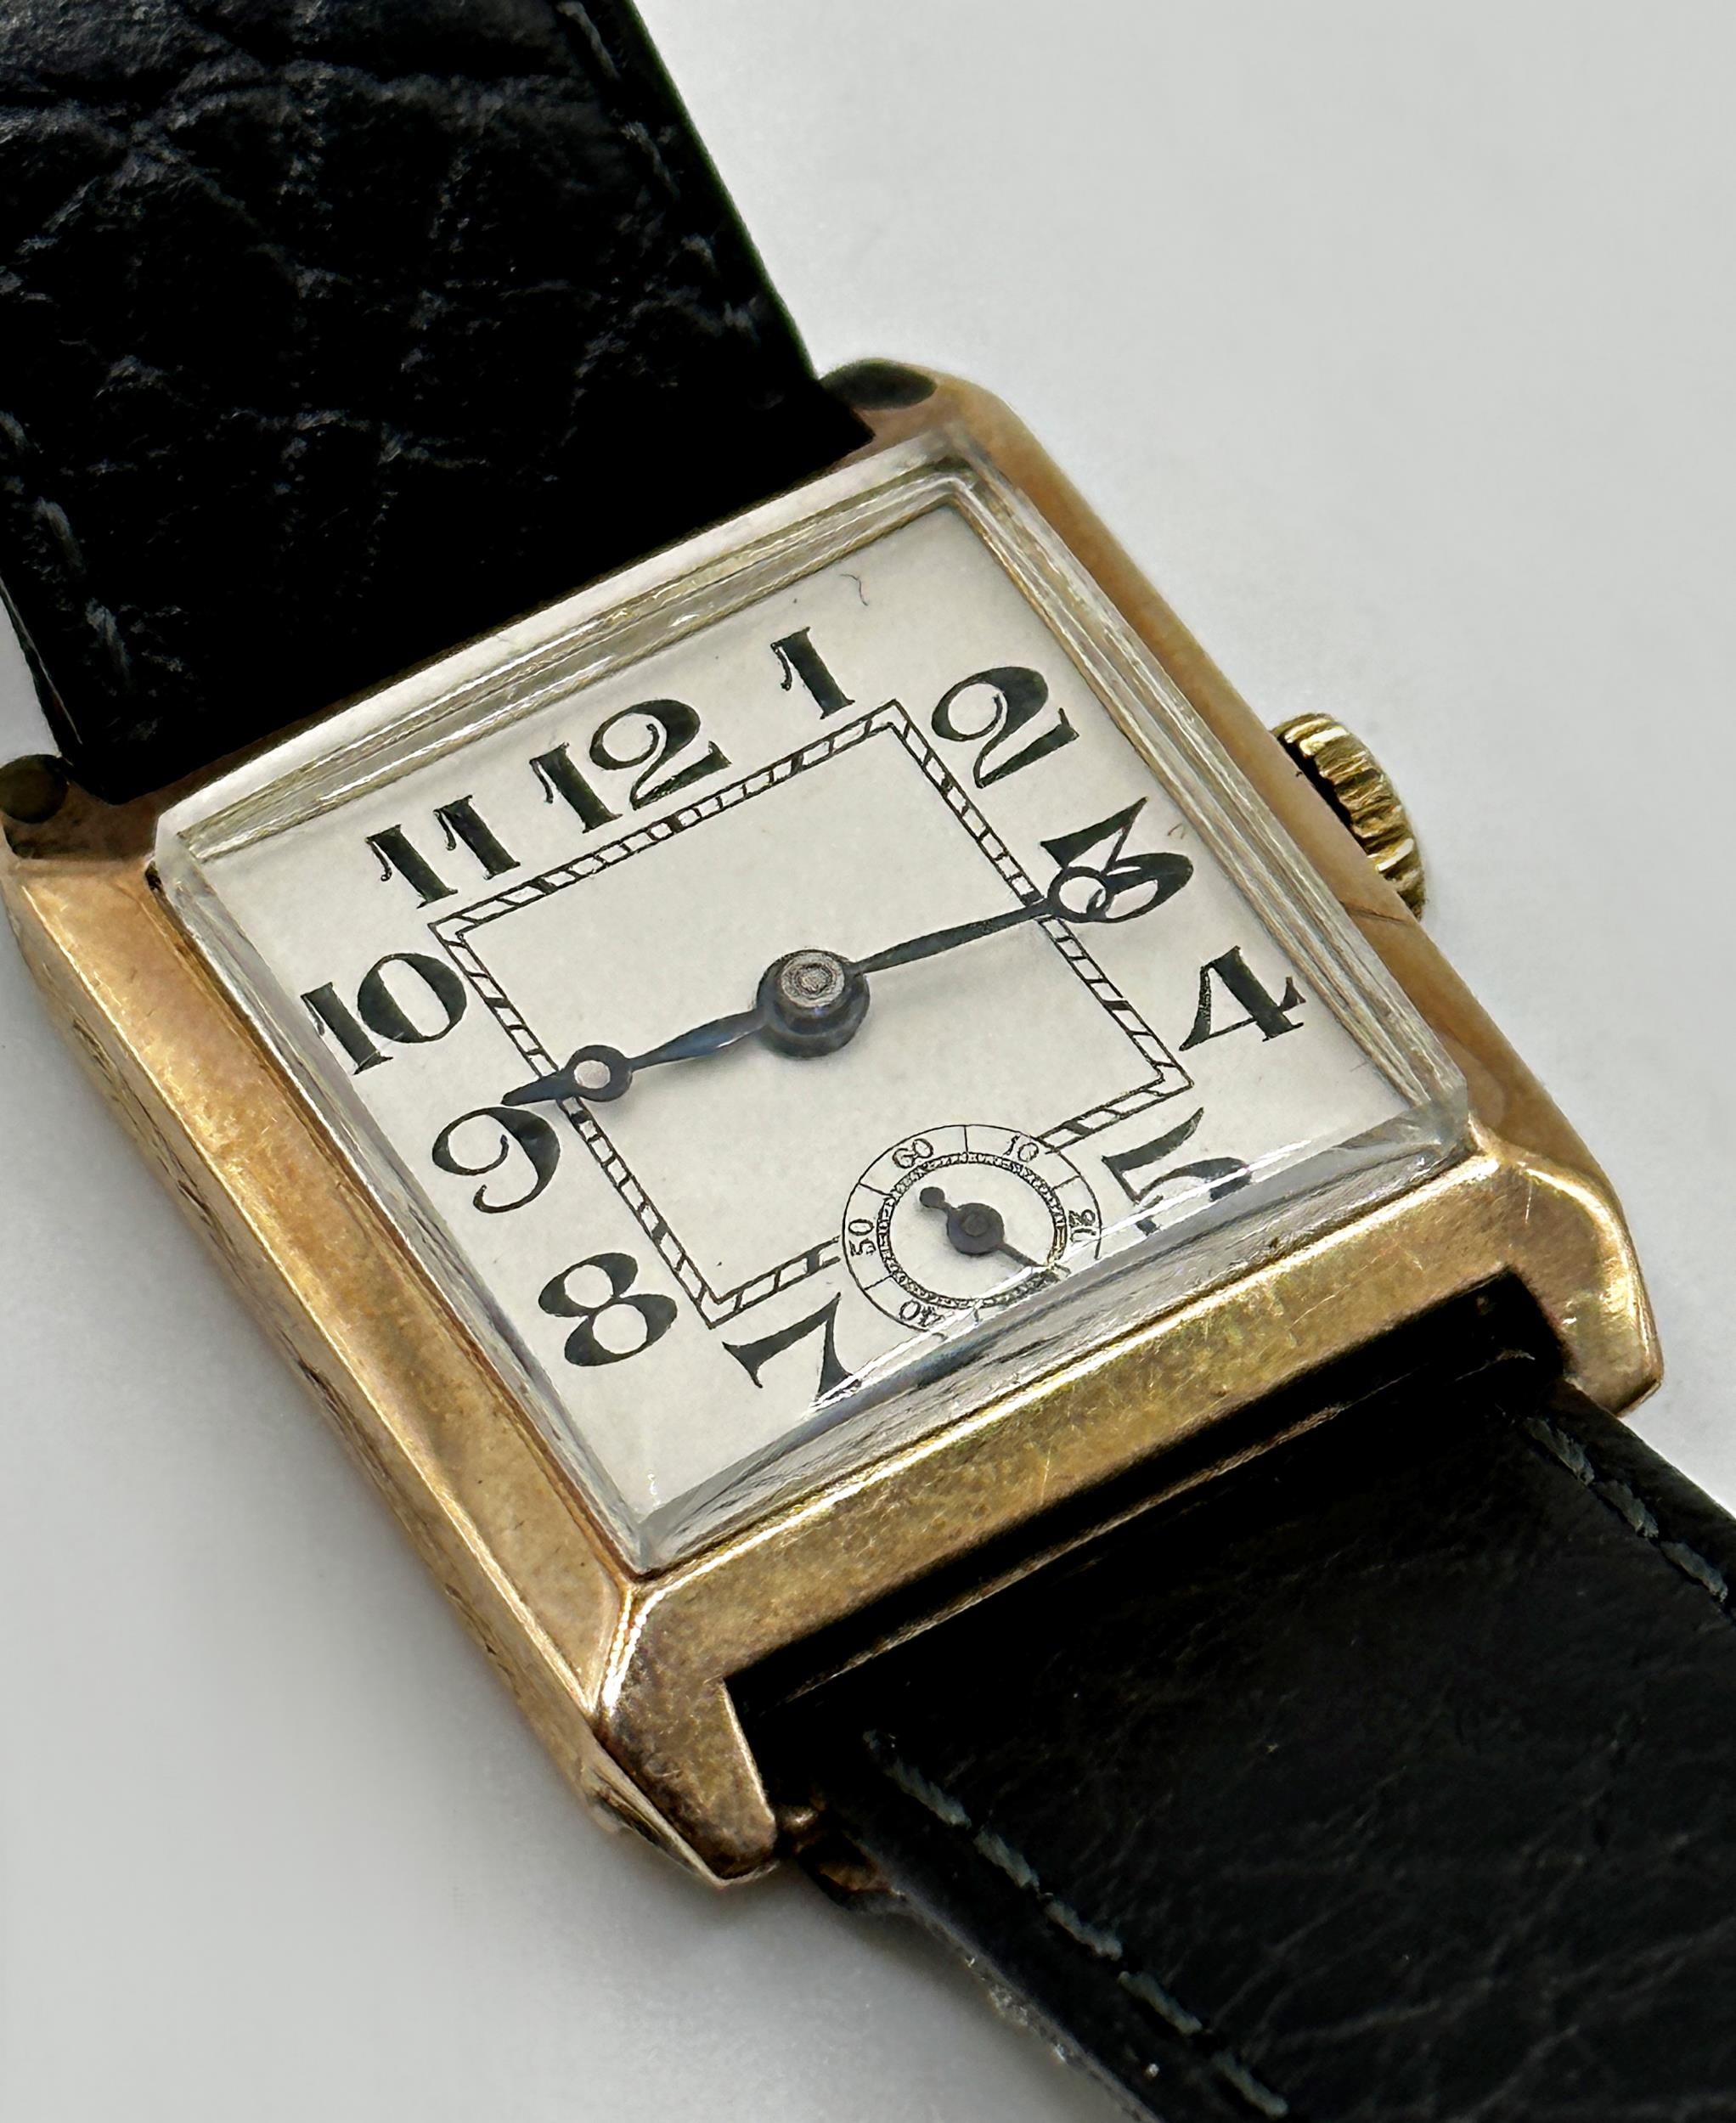 Vintage 9ct gents dress watch, champagne square dial with Arabic numerals and subsidiary second